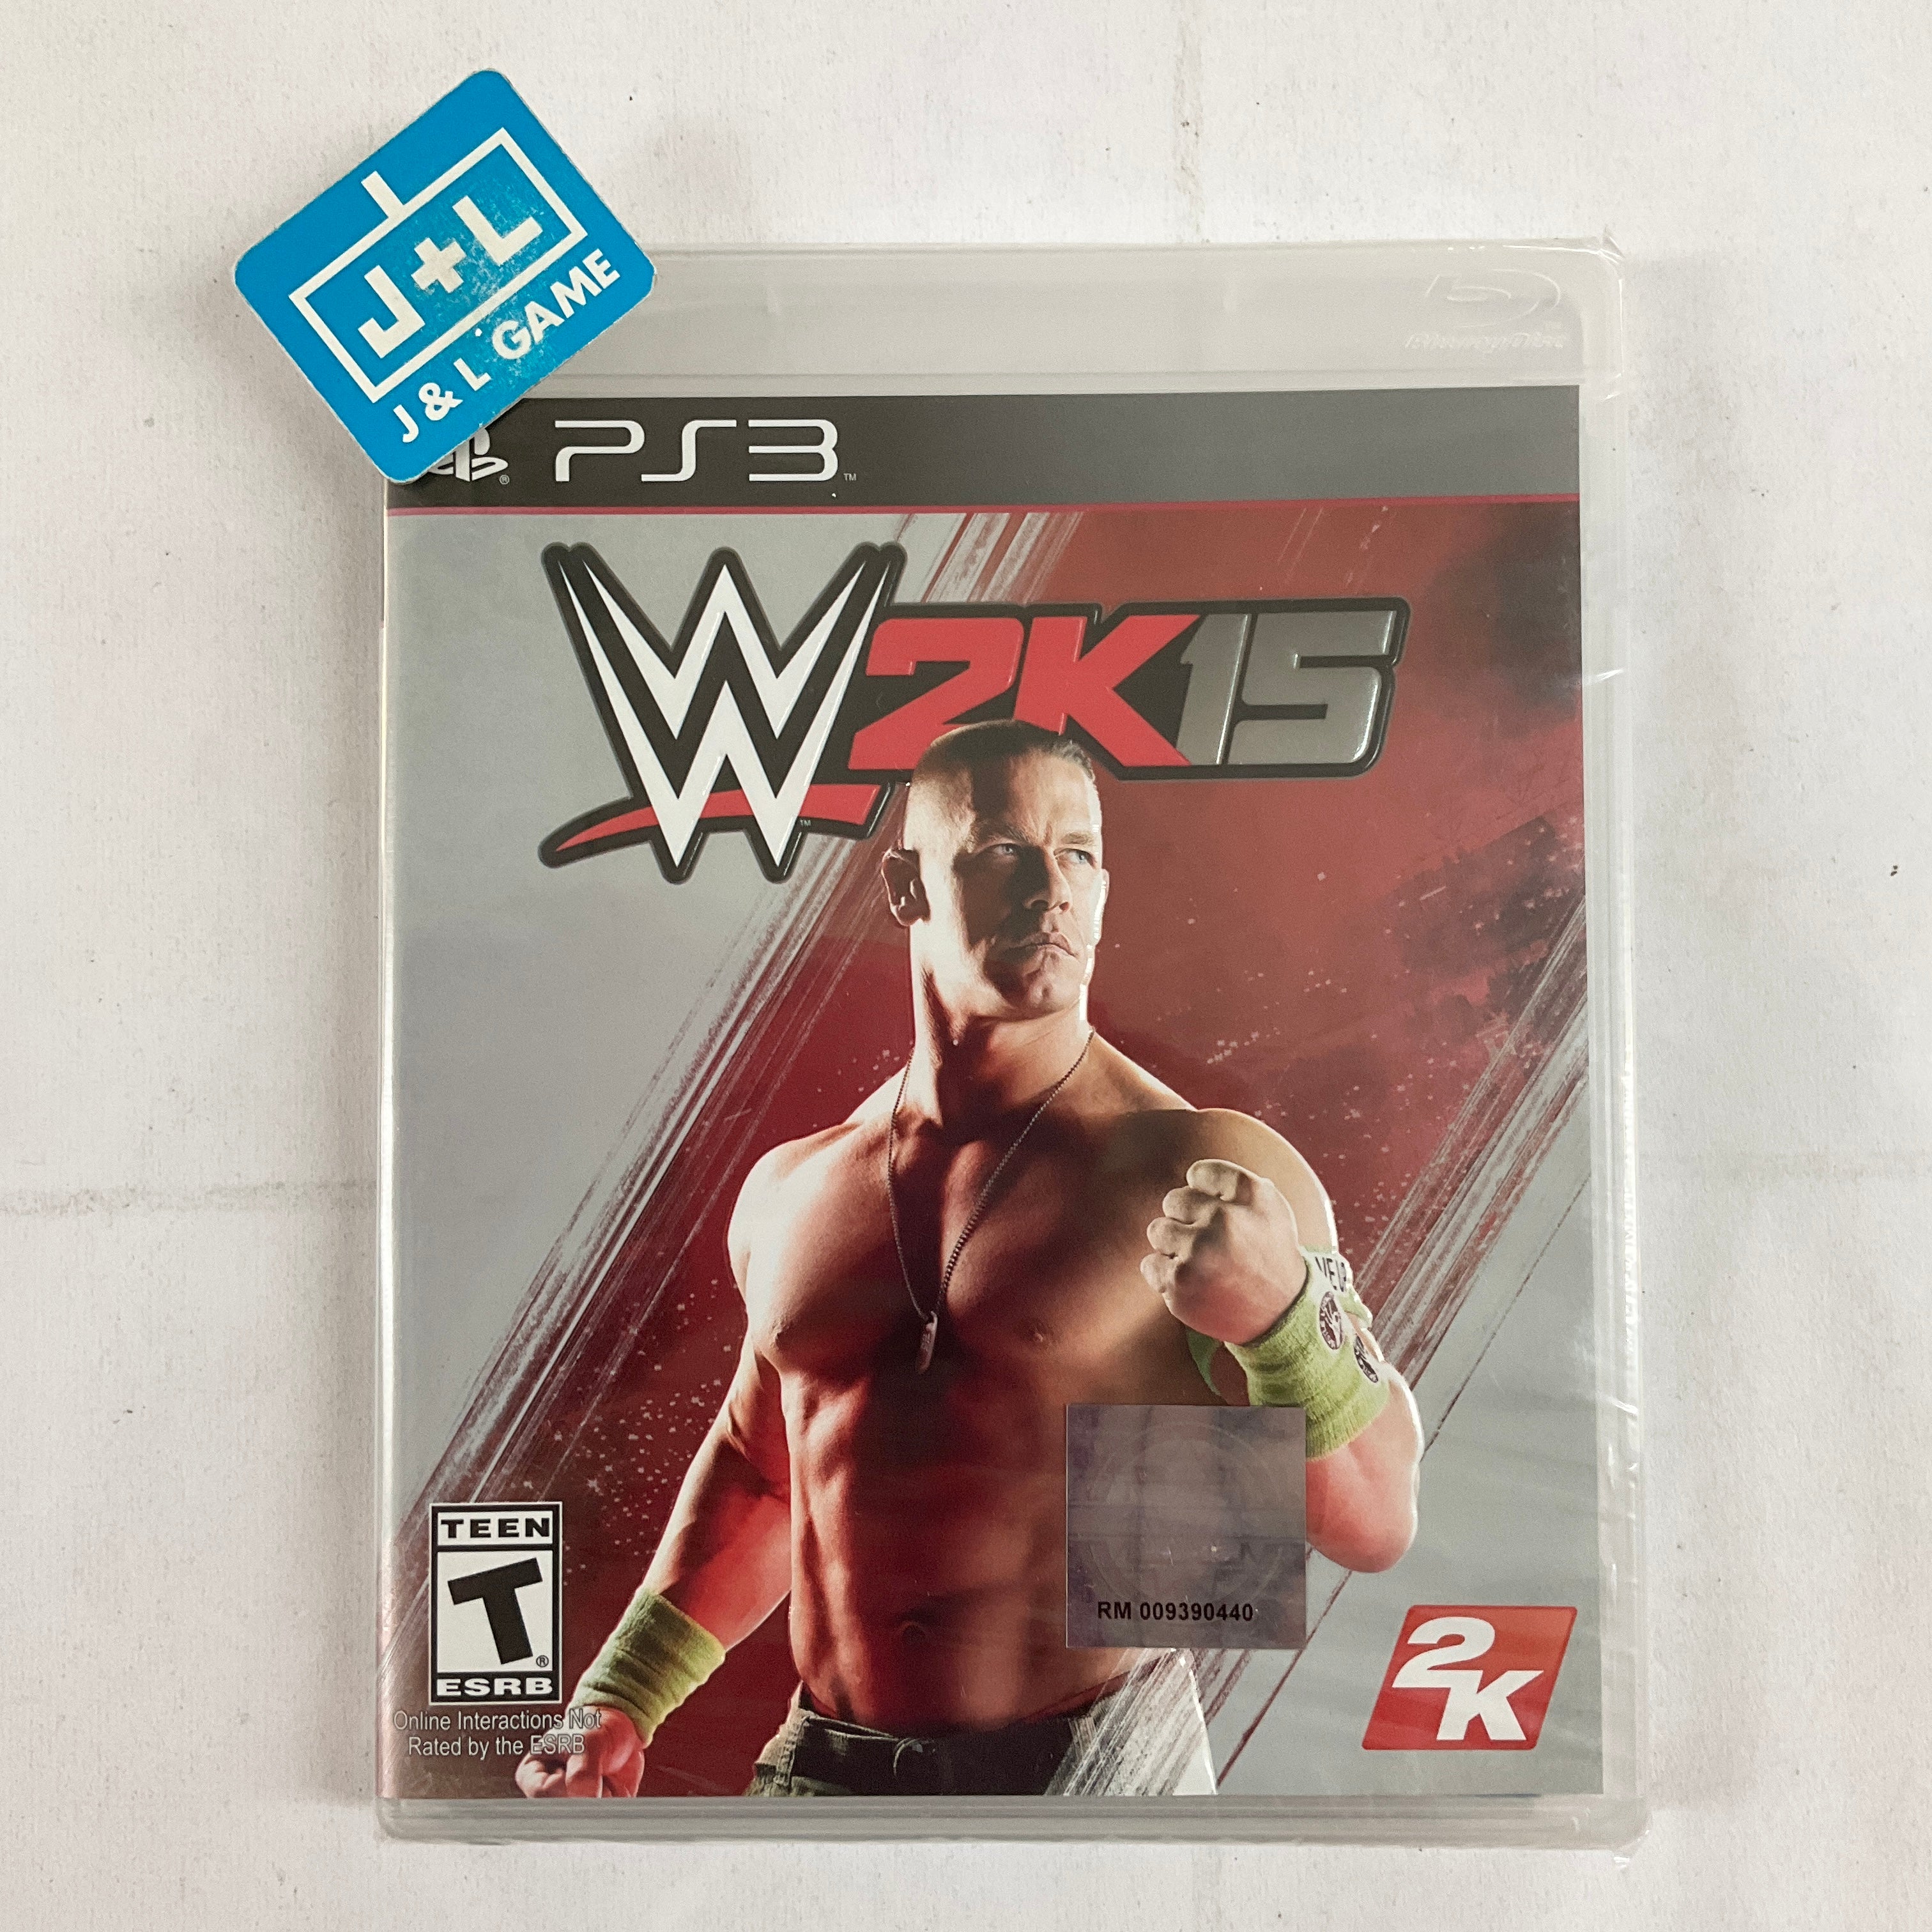 WWE 2K15 - (PS3) PlayStation 3 Video Games 2K Sports   